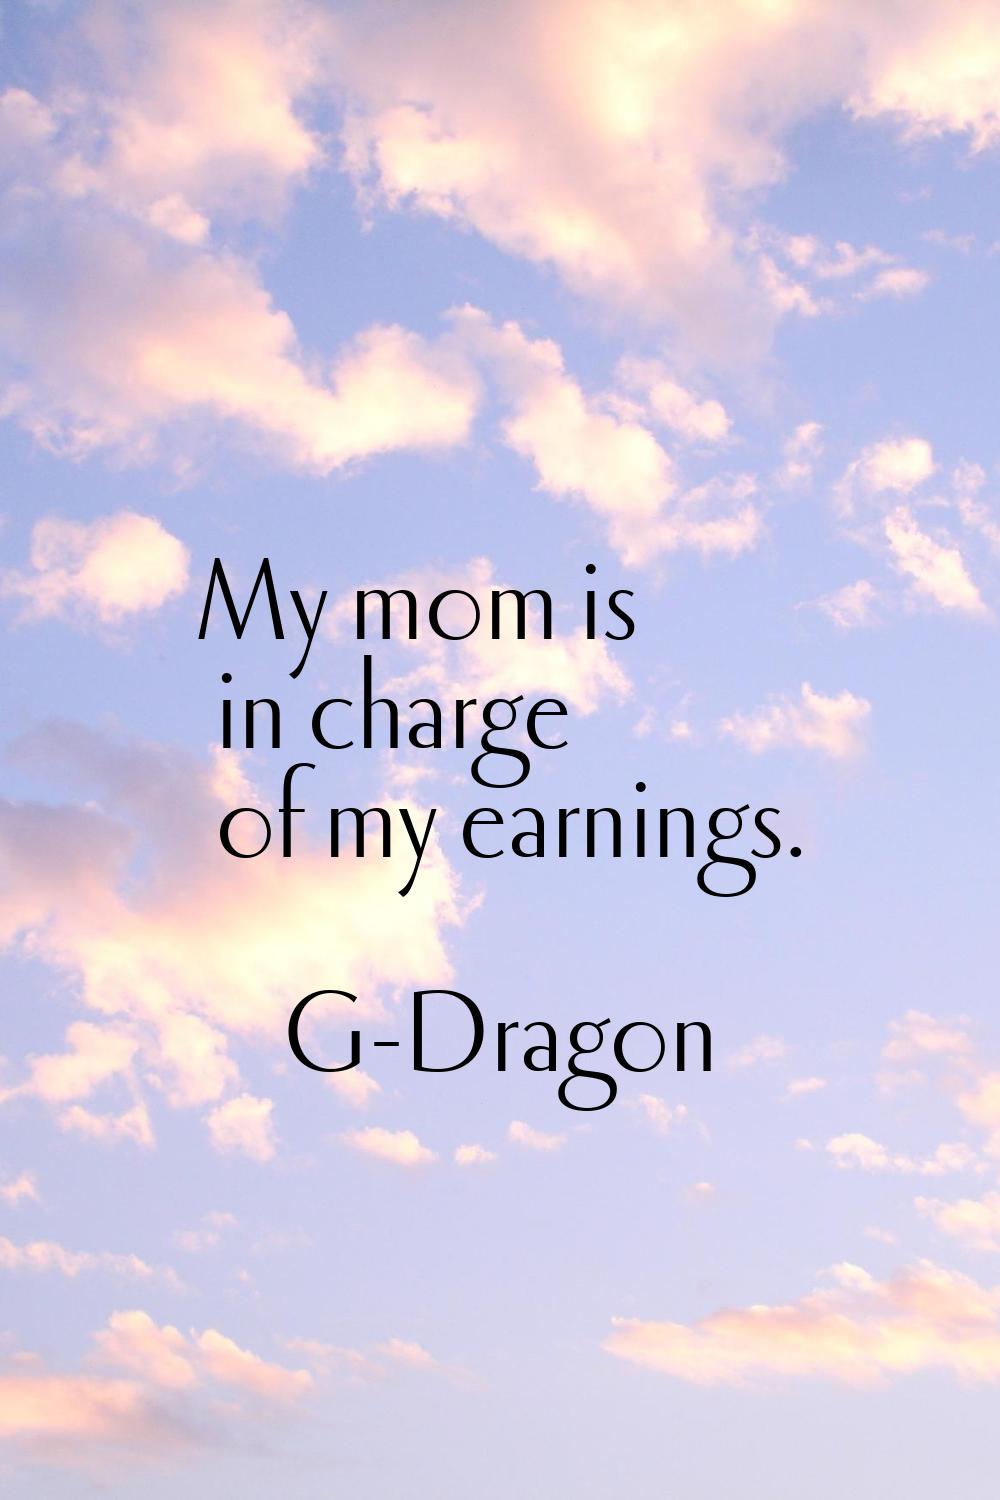 My mom is in charge of my earnings.